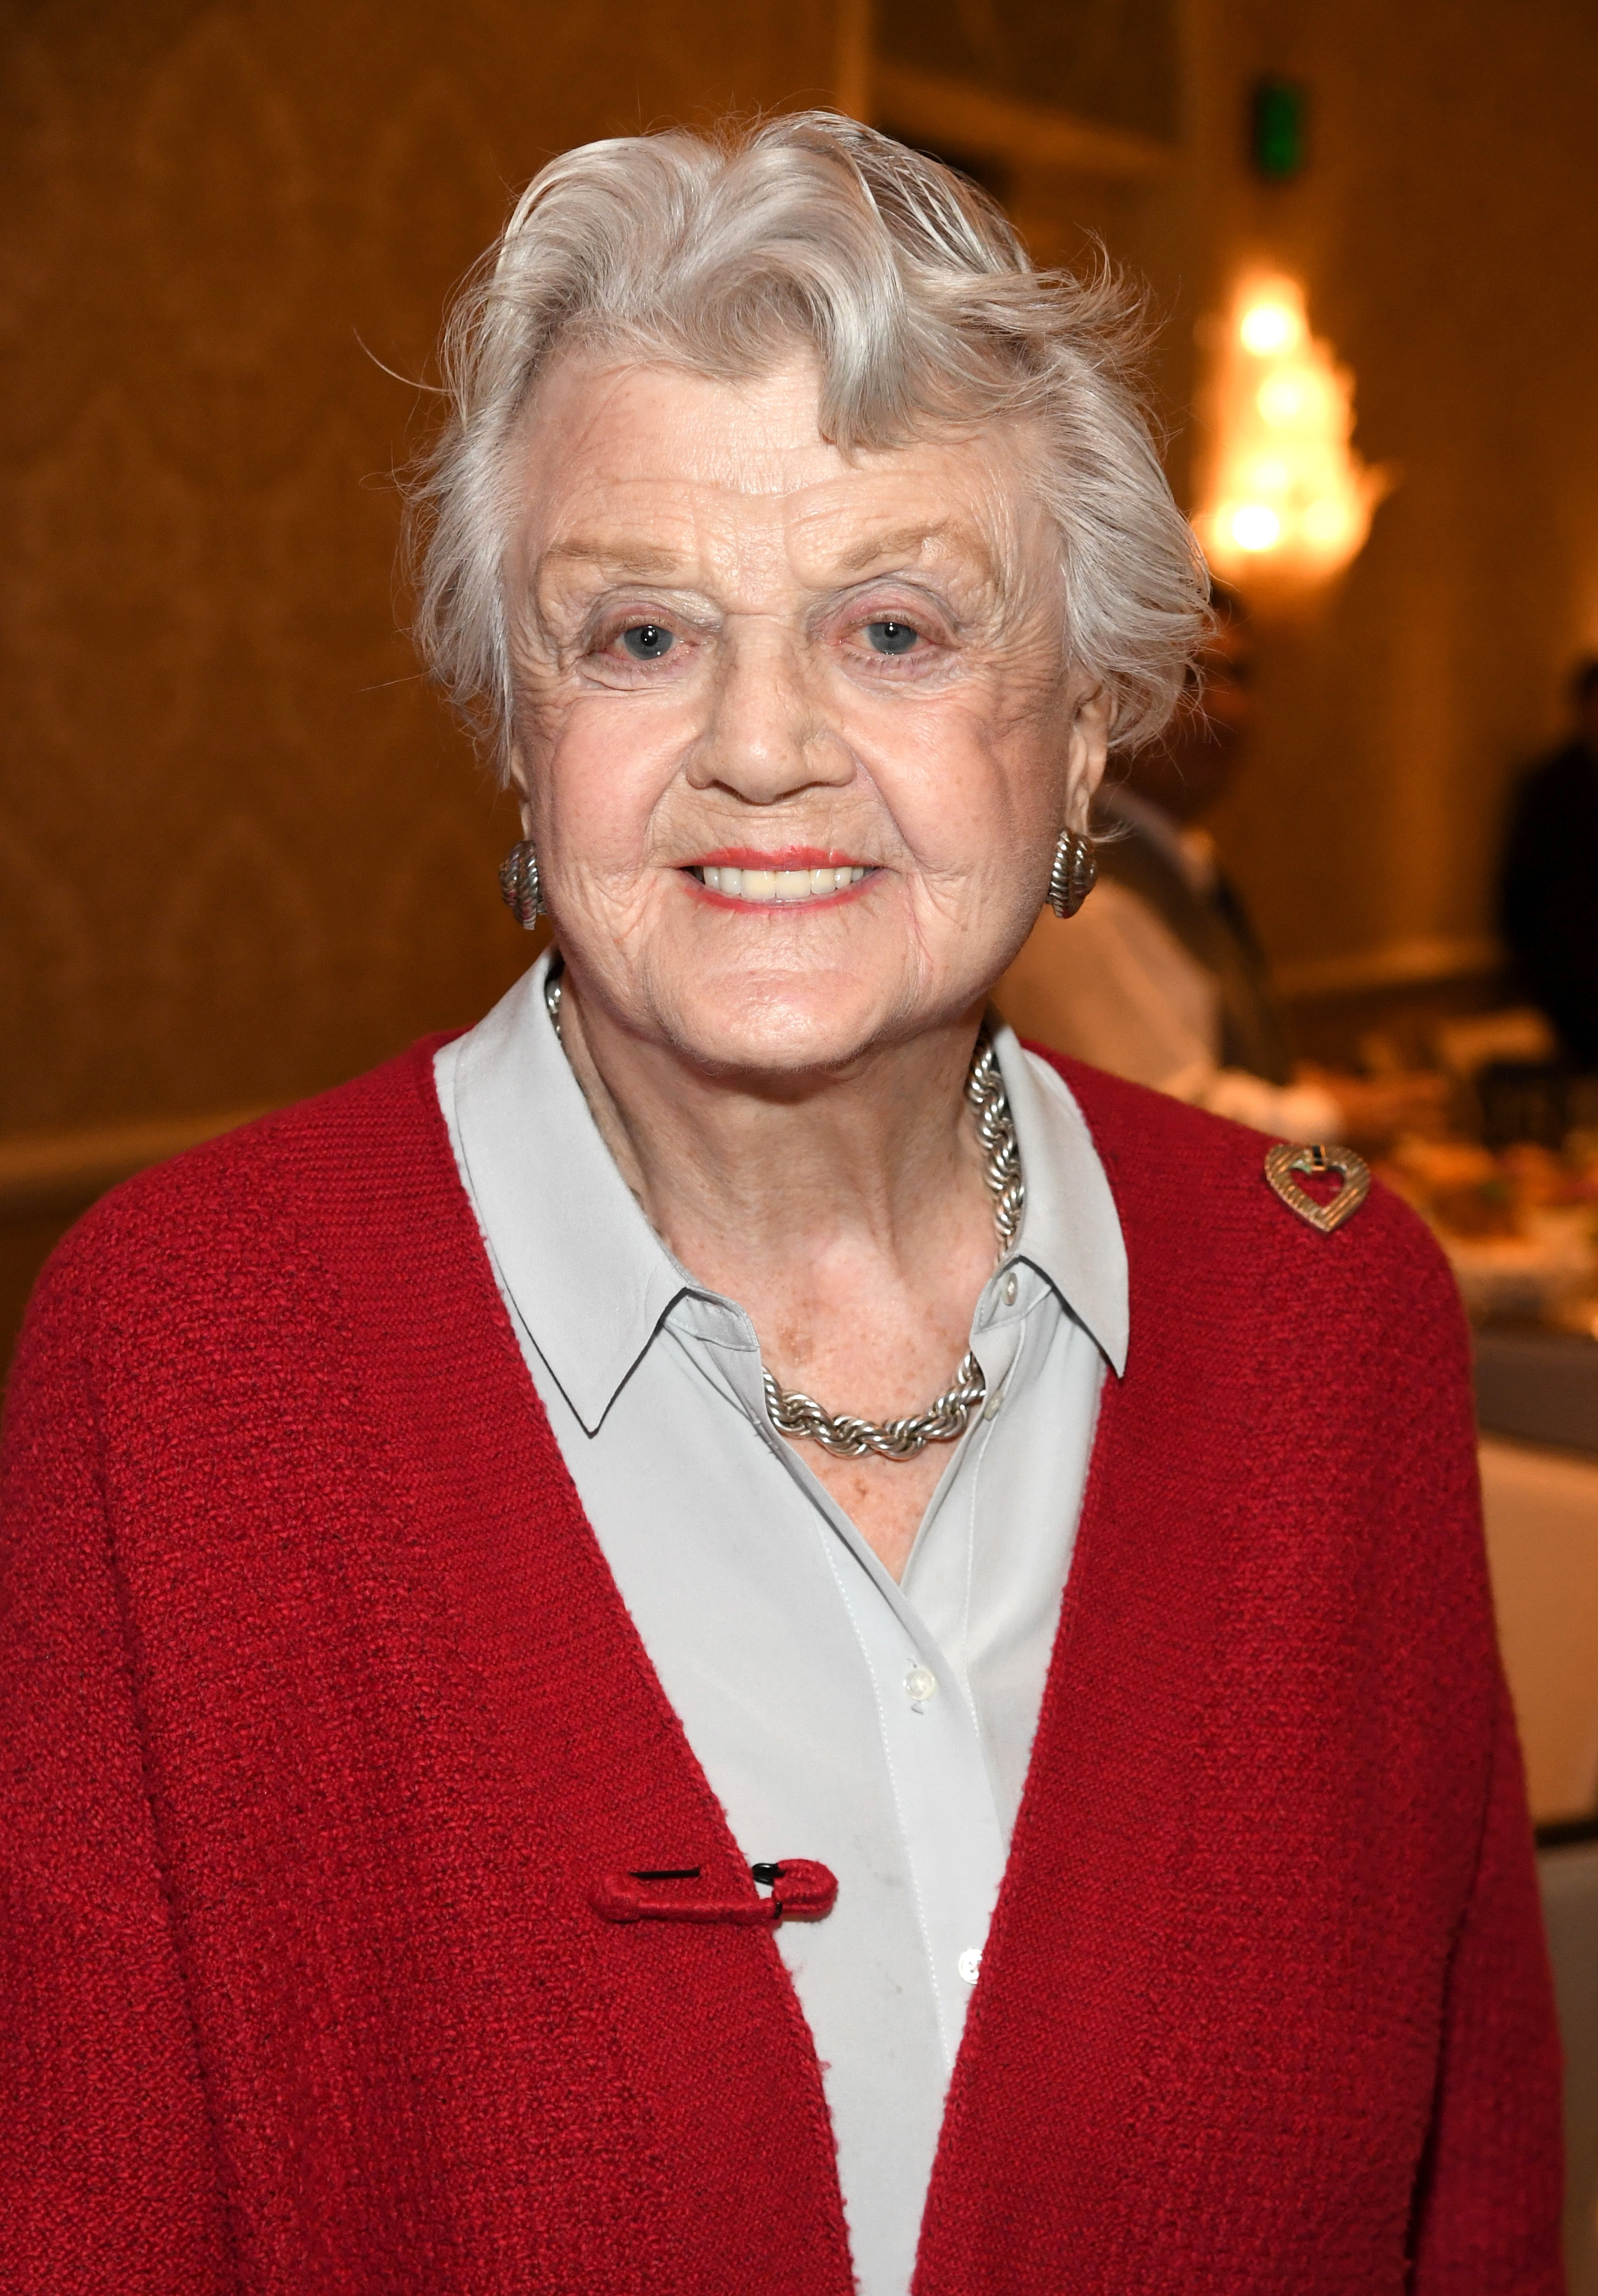 Angela Lansbury attends the 19th Annual AFI Awards at Four Seasons Hotel, 2019, Los Angeles, California. | Photo: Getty Images